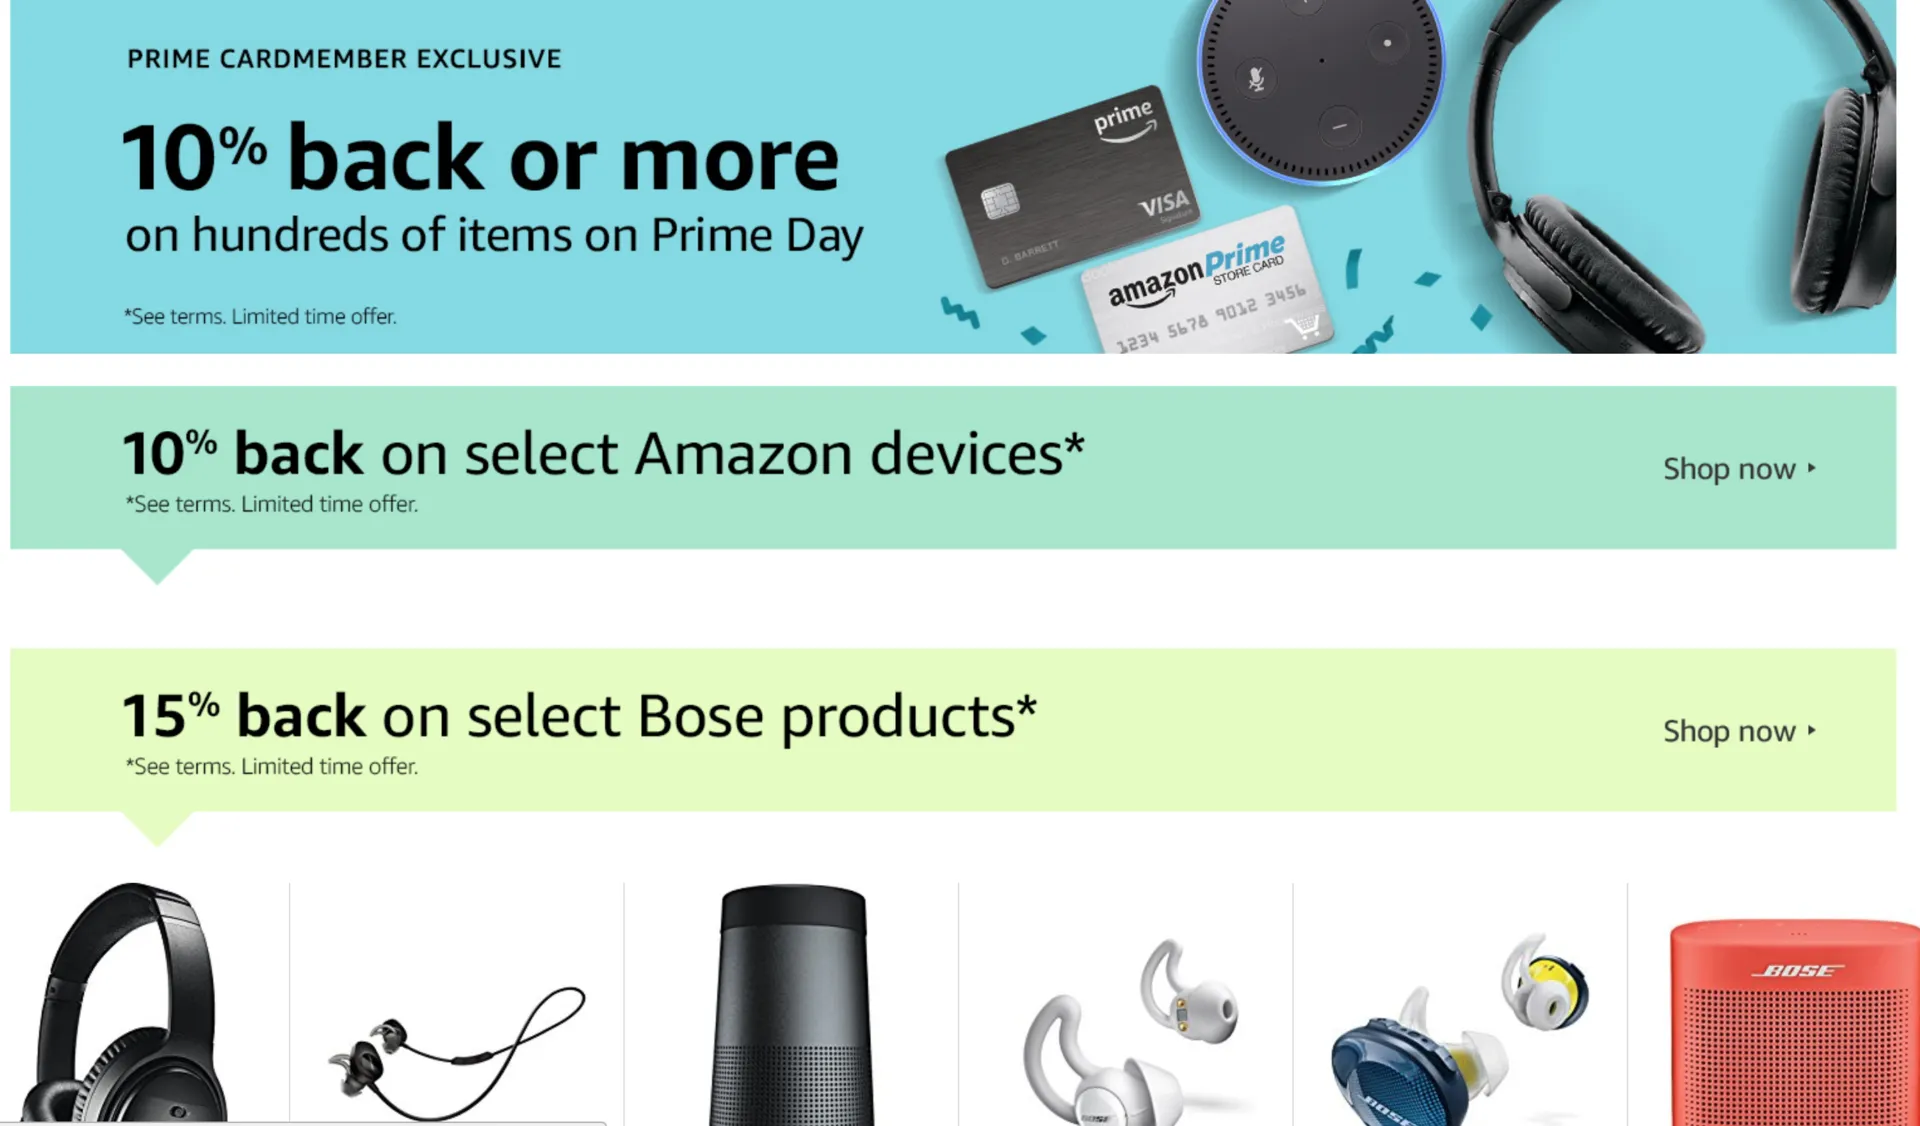 These are Special Prime Day Cashback Offers for Prime Credit Customers